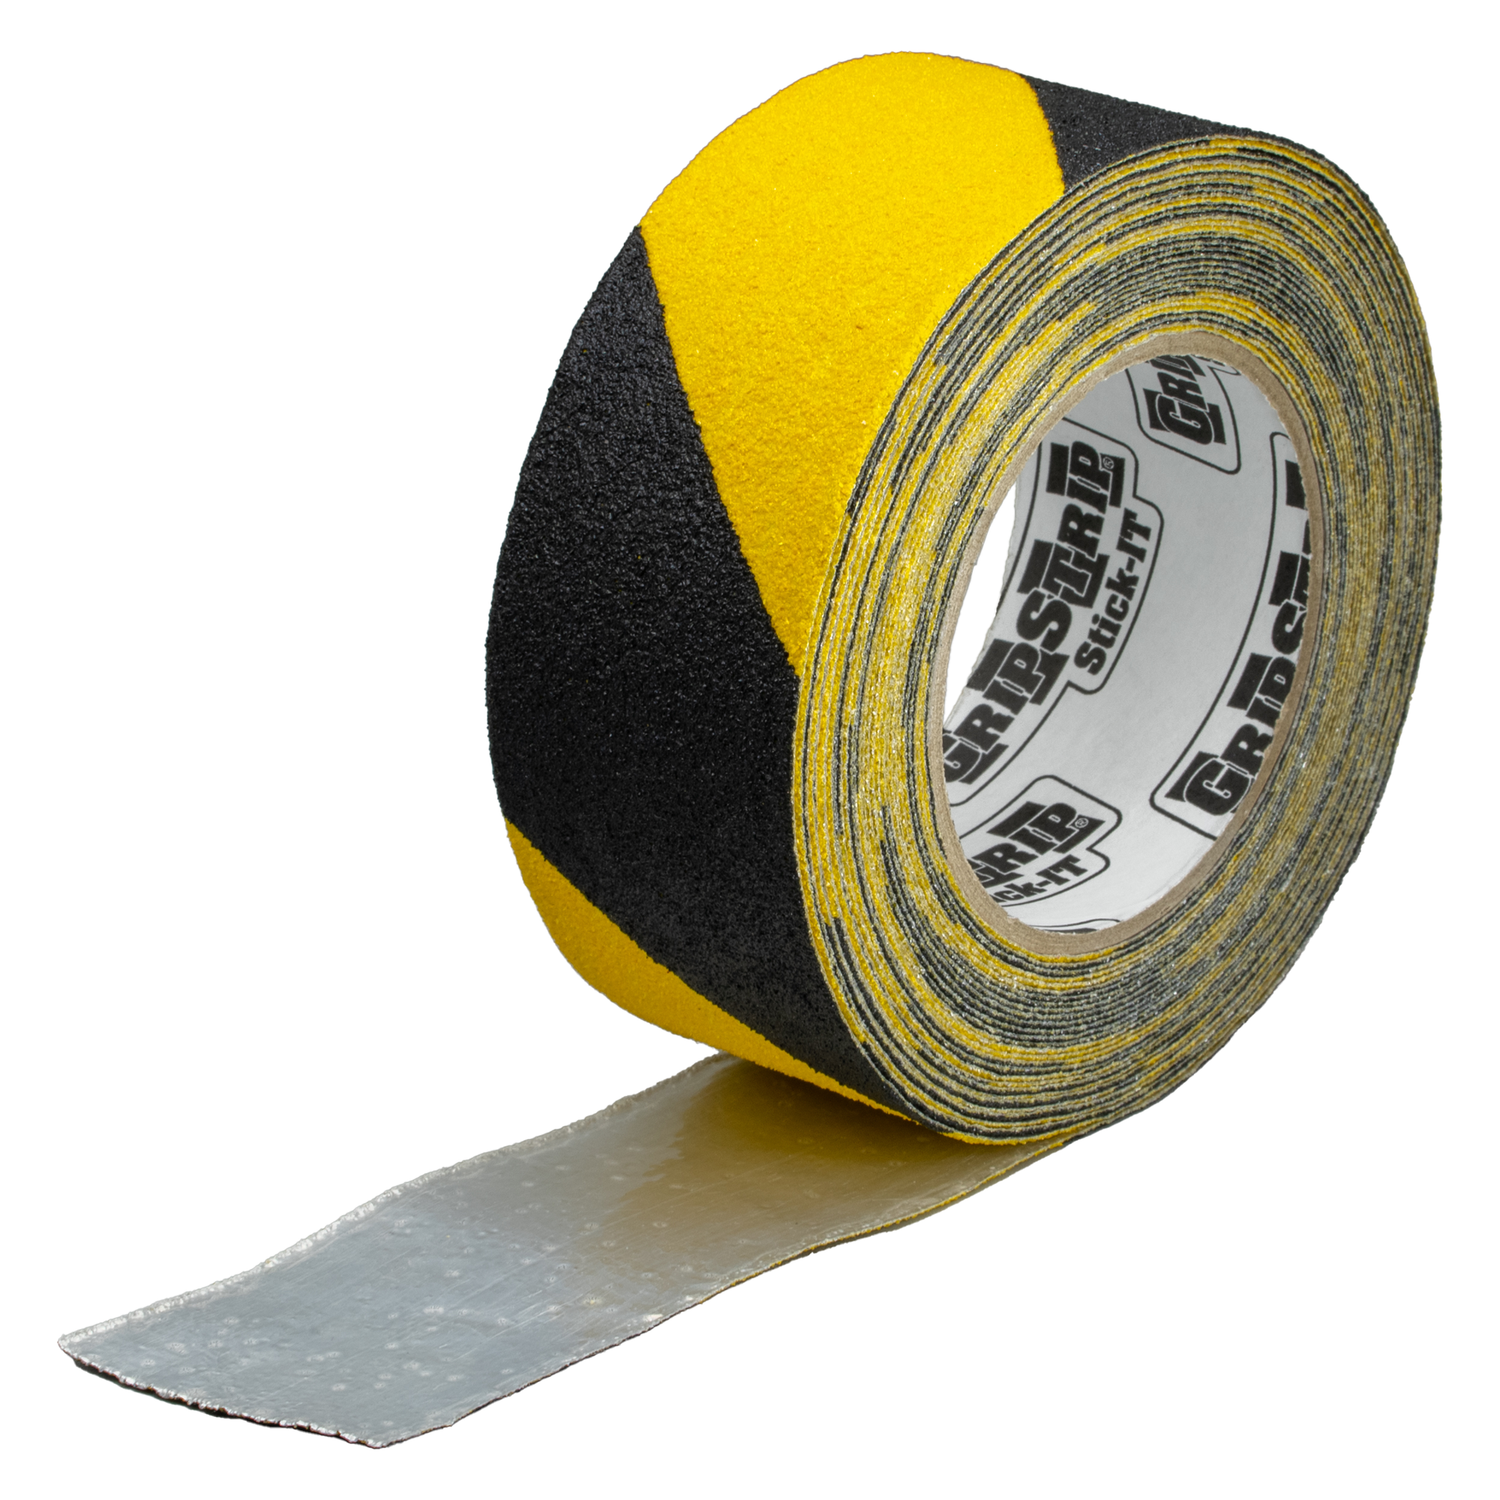 Specialty Tapes - Aluminum backing - 2" width 30 ft - Anti slip Tape